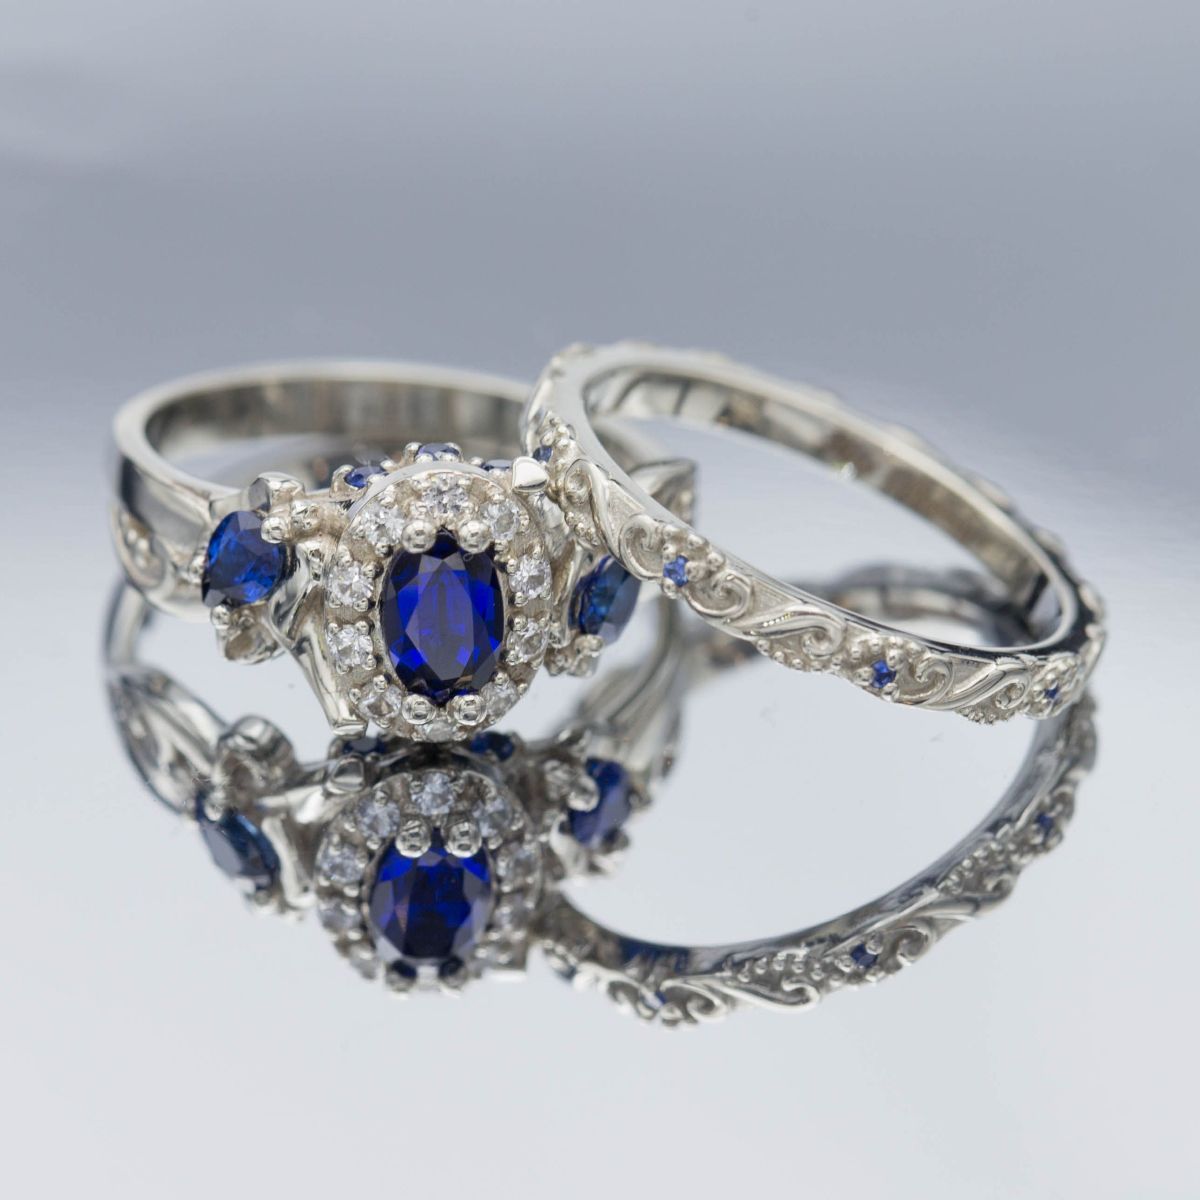 Sapphire Engagement Rings | Custommade Within Most Popular Blue Square Sparkle Halo Rings (View 18 of 25)